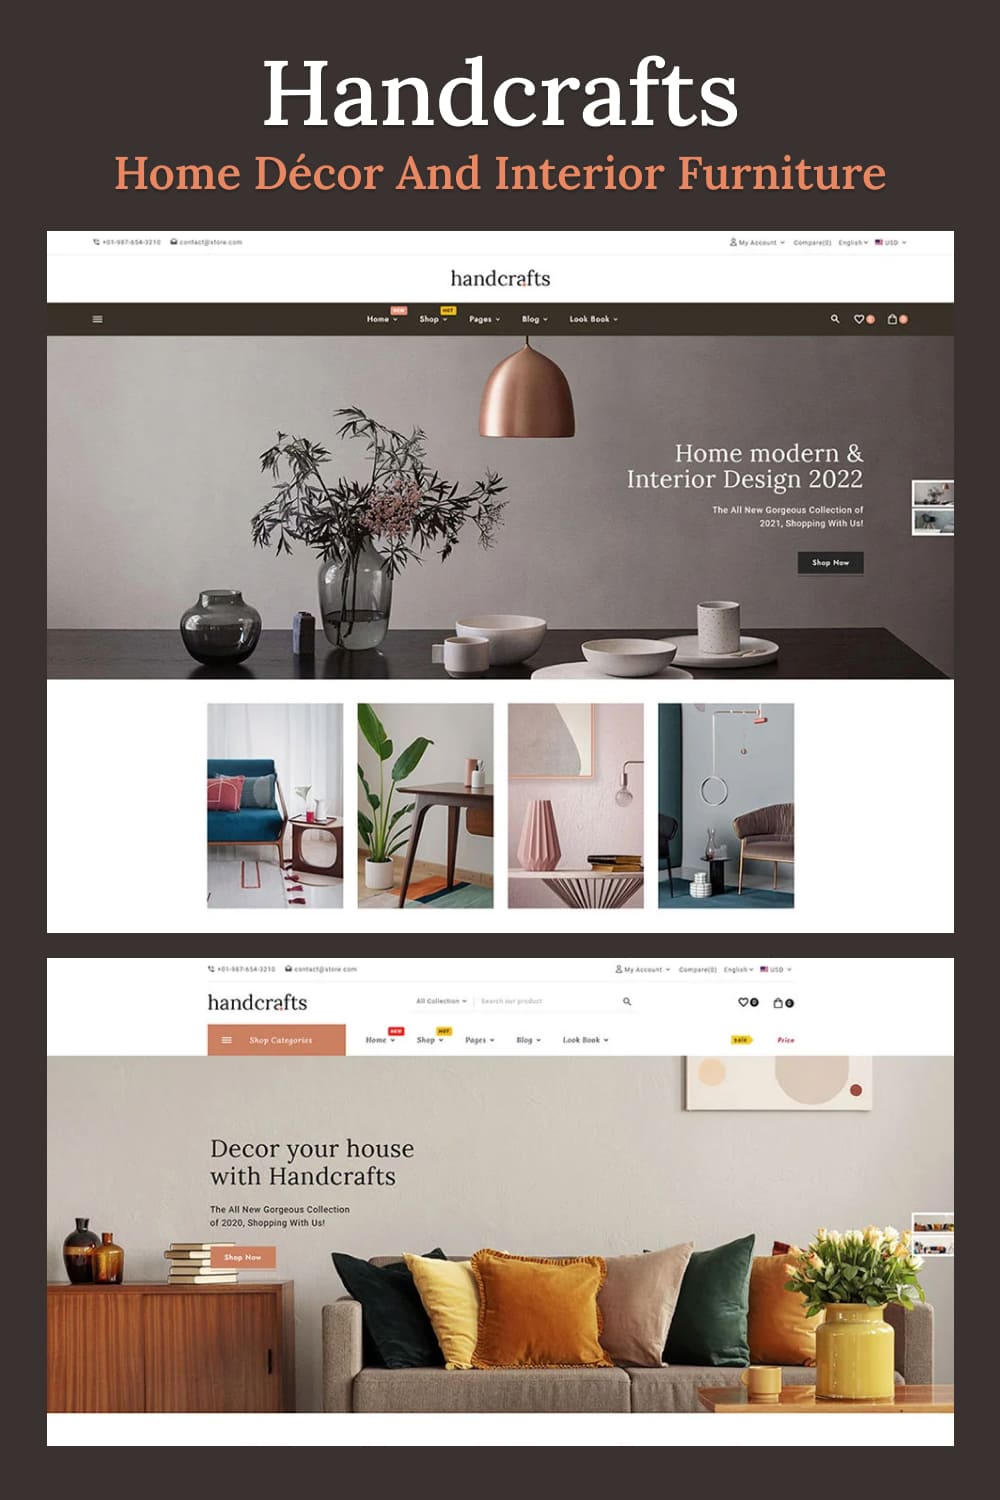 Handcrafts home decor and interior furniture shopify 2.0 responsive theme, picture for pinterest 1000x1500.